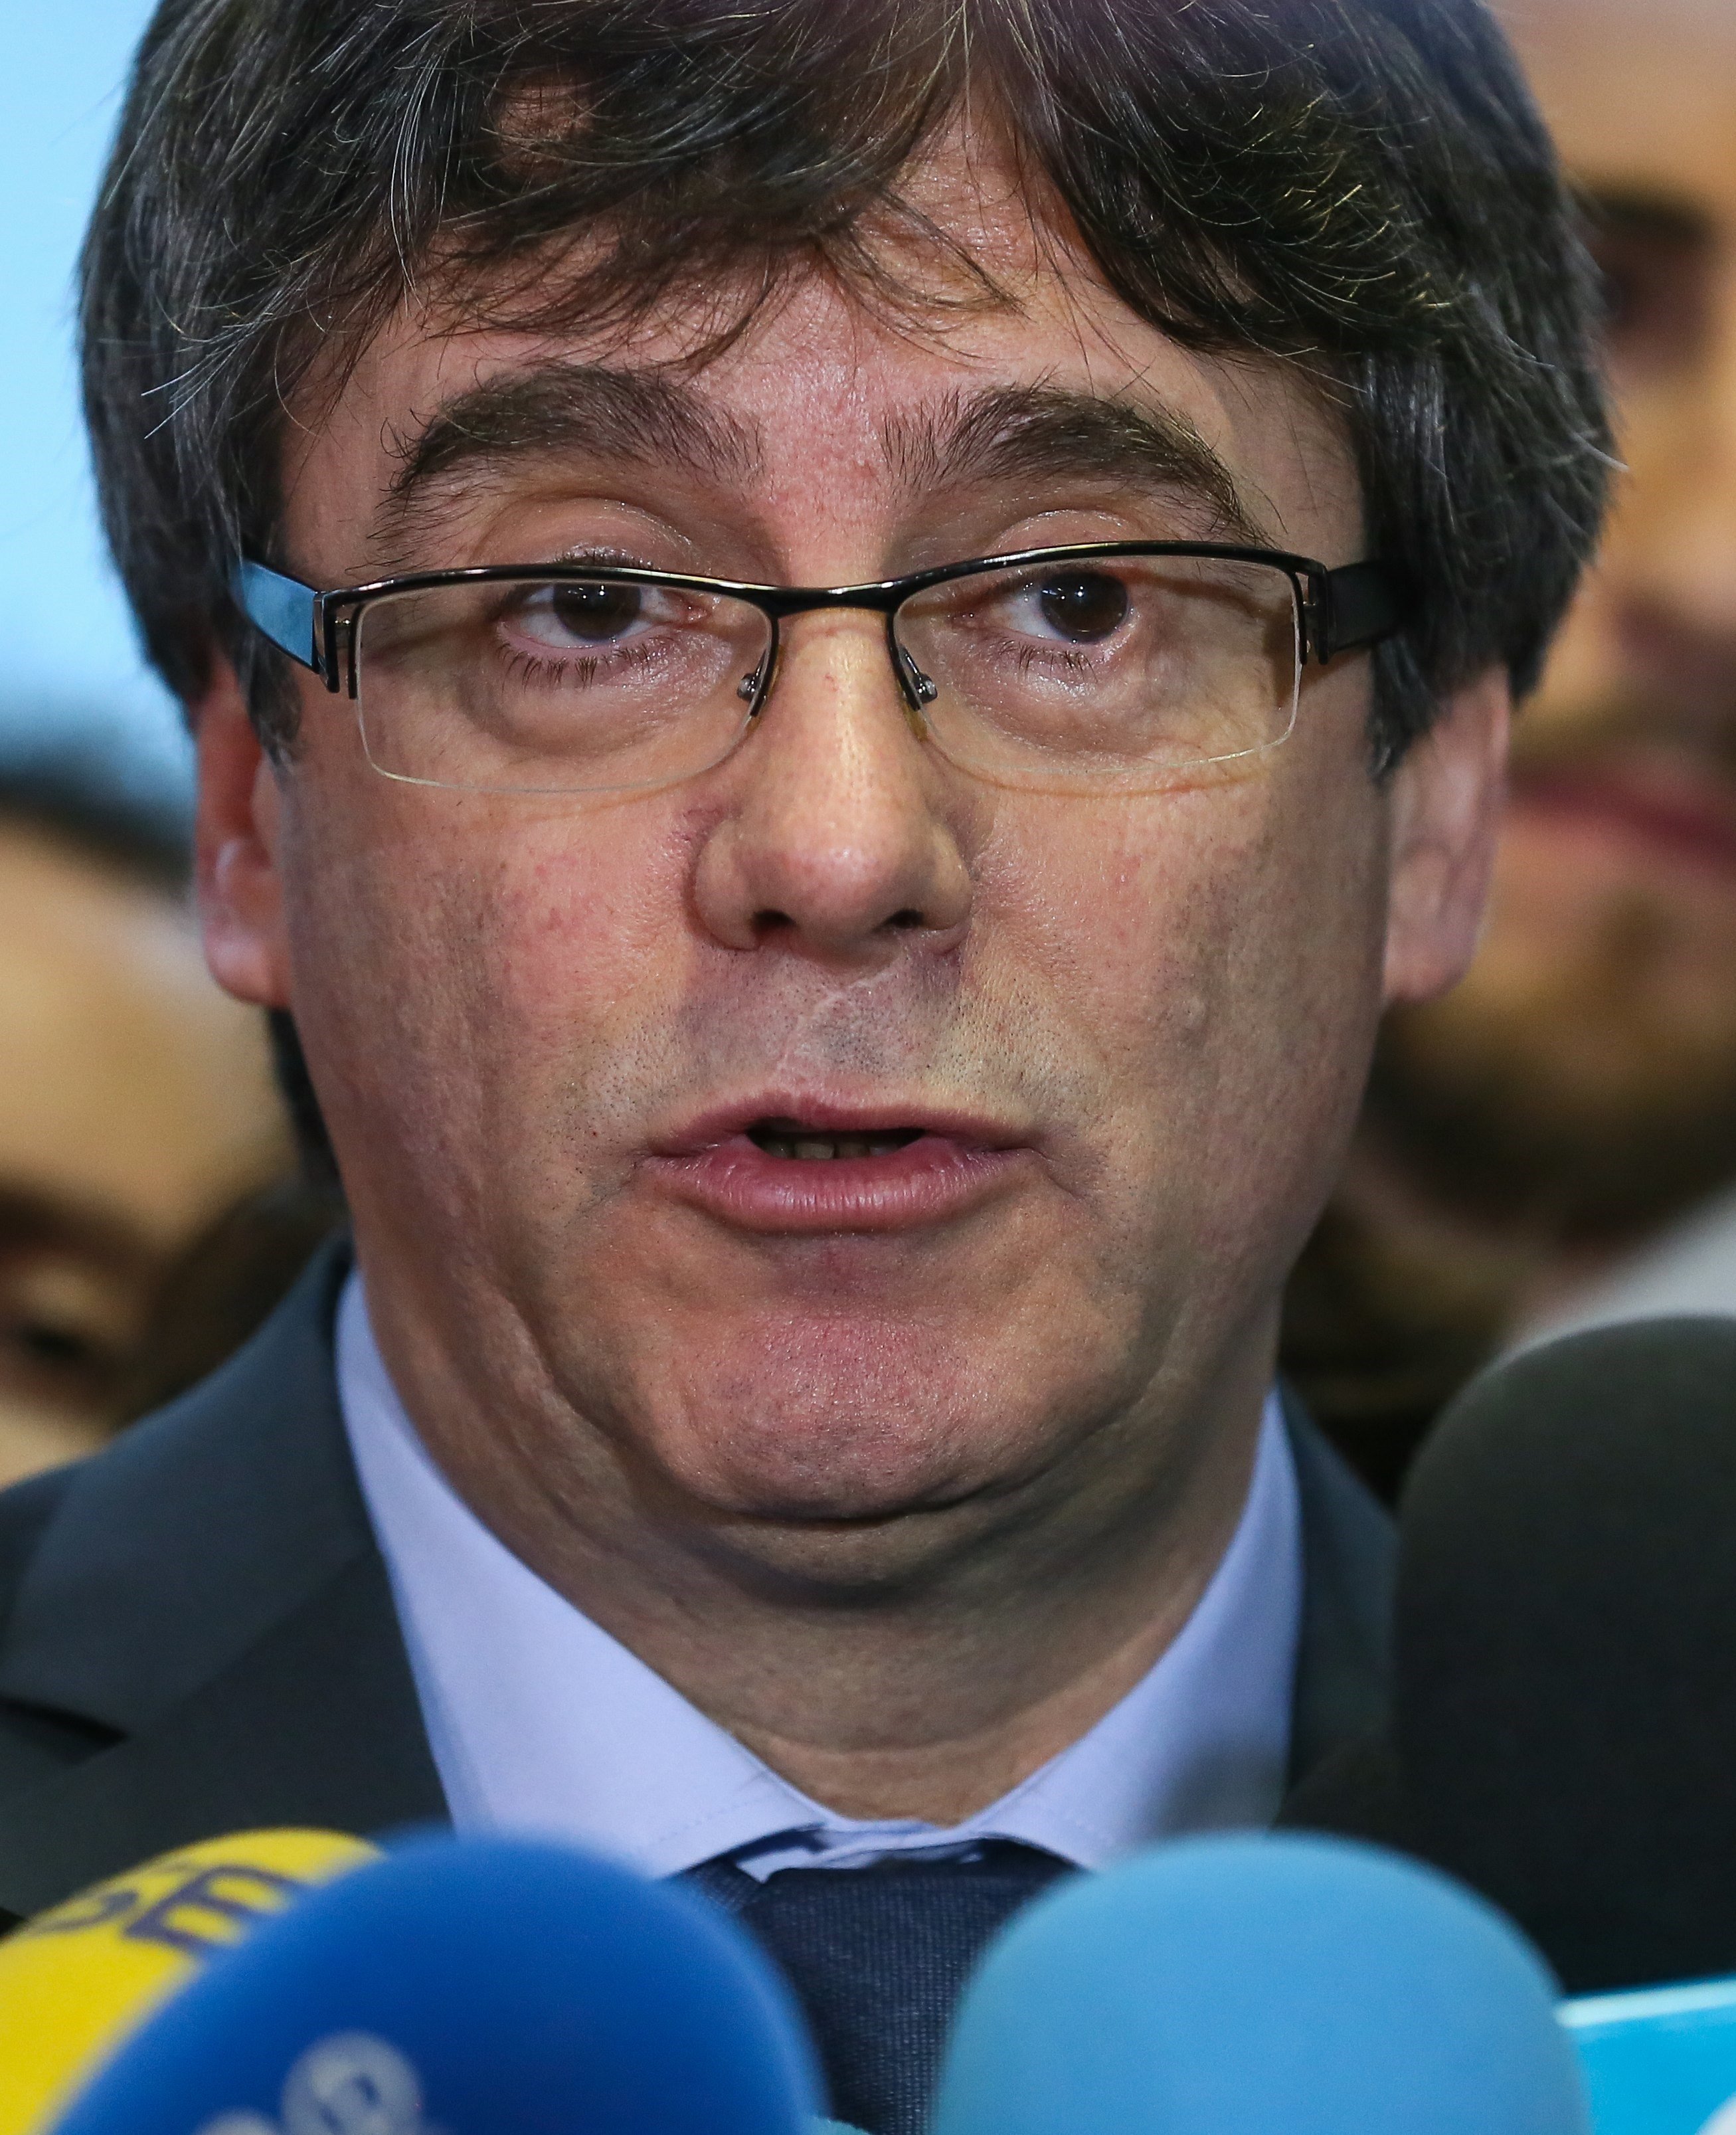 Puigdemont warns it's "unrealistic" to comply with Spanish intervention in Catalonia